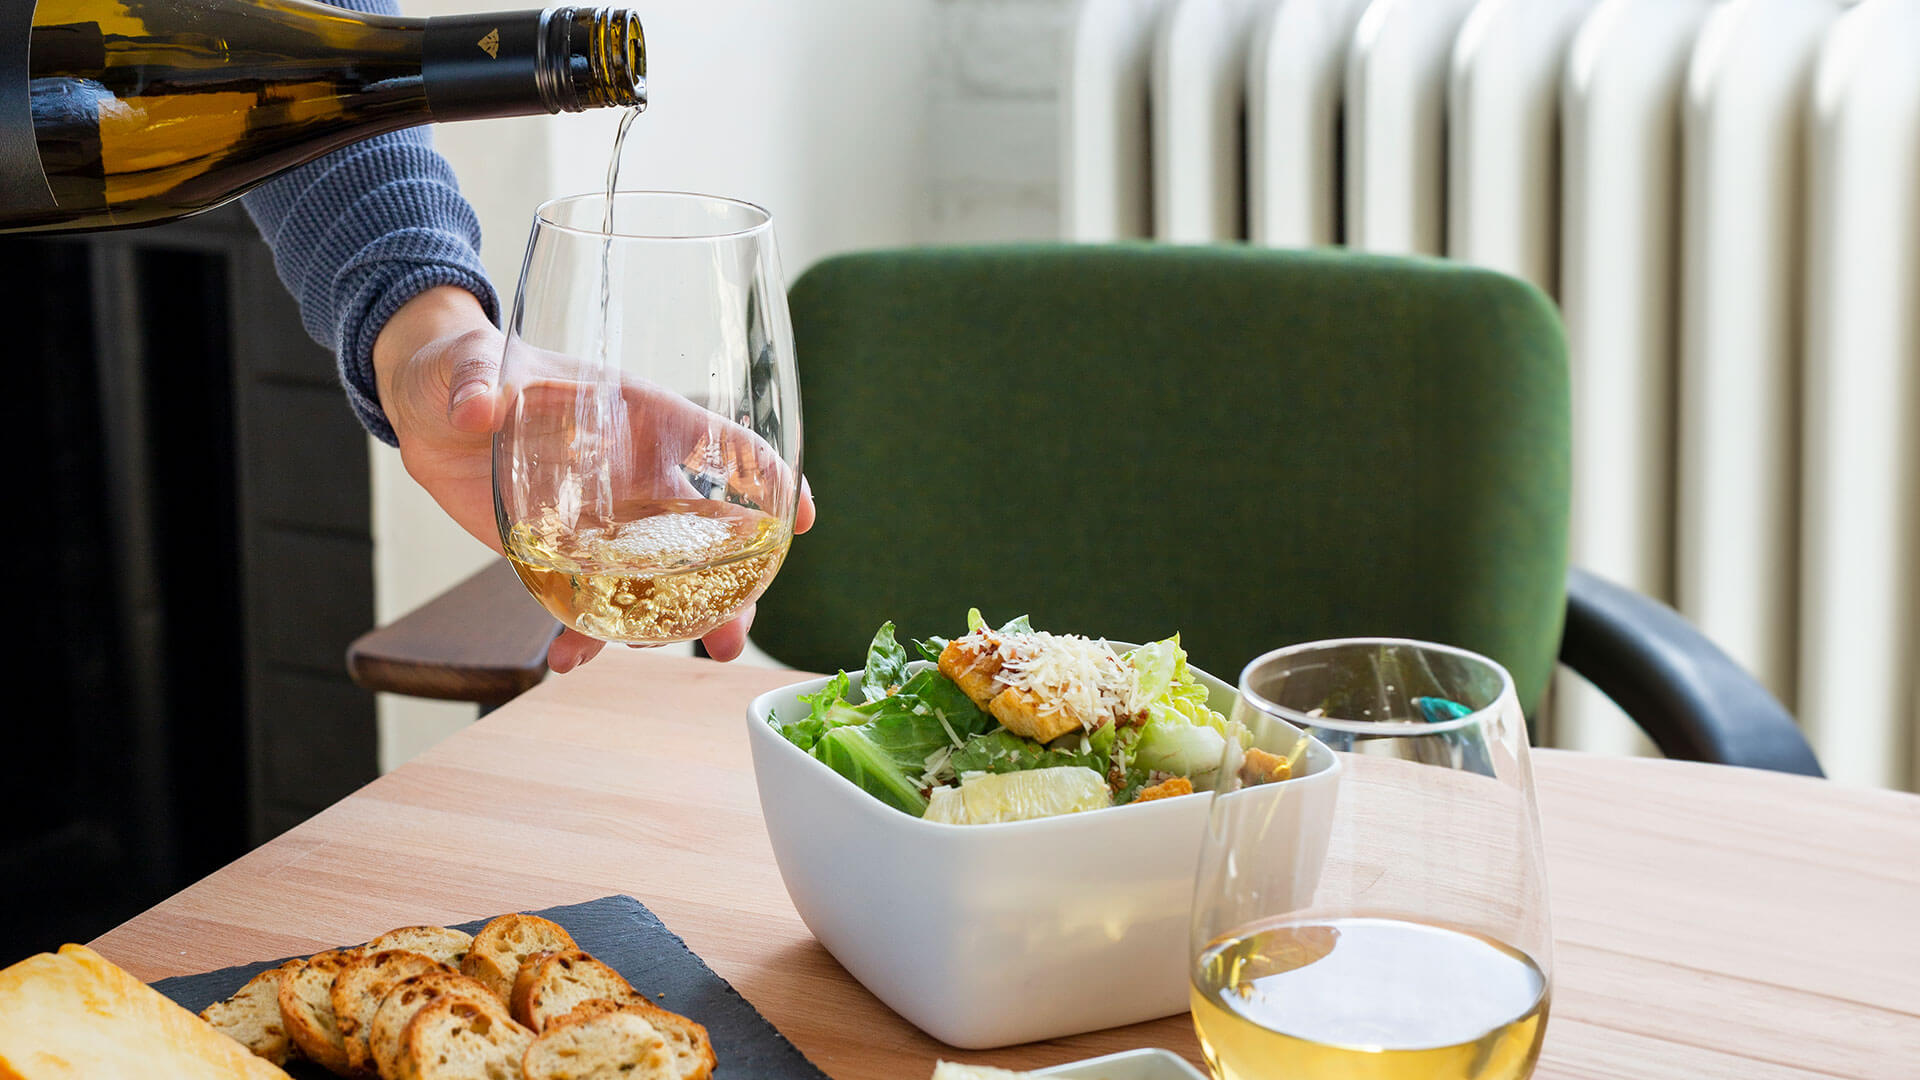 Pouring of Inniskillin Reserve Chardonnay into a glass, and paired with a salad, aged cheese and crackers.